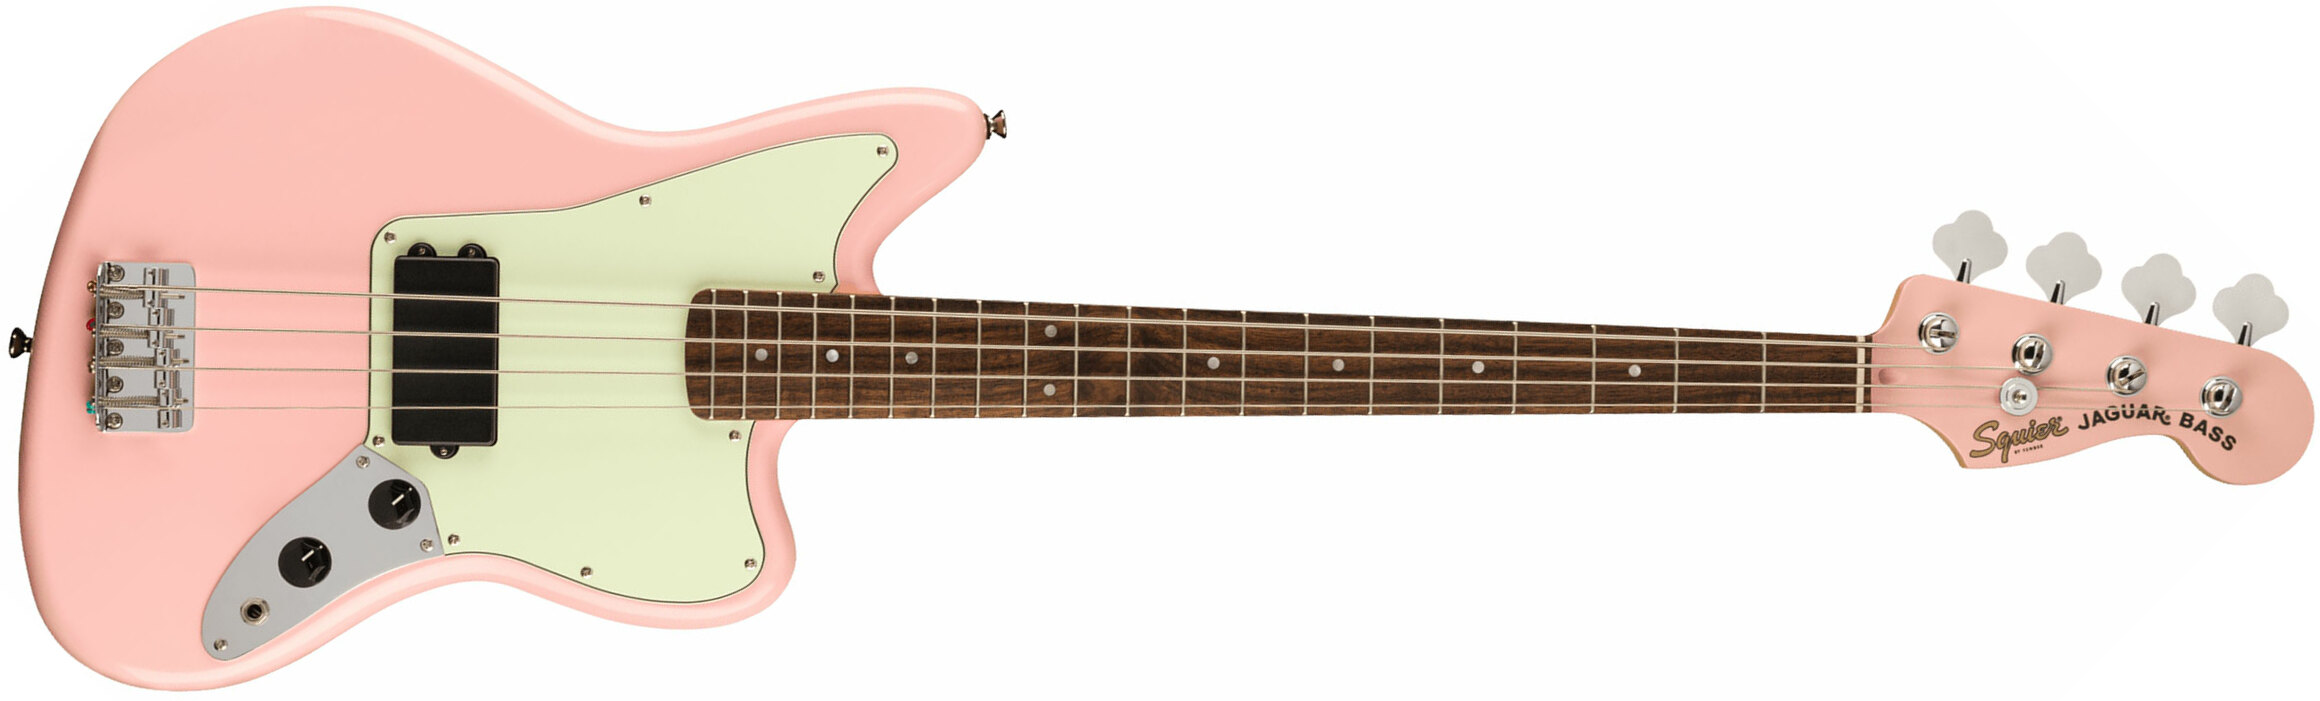 Squier Jaguar Bass H Affinity Fsr Lau - Shell Pink - Solidbody E-bass - Main picture